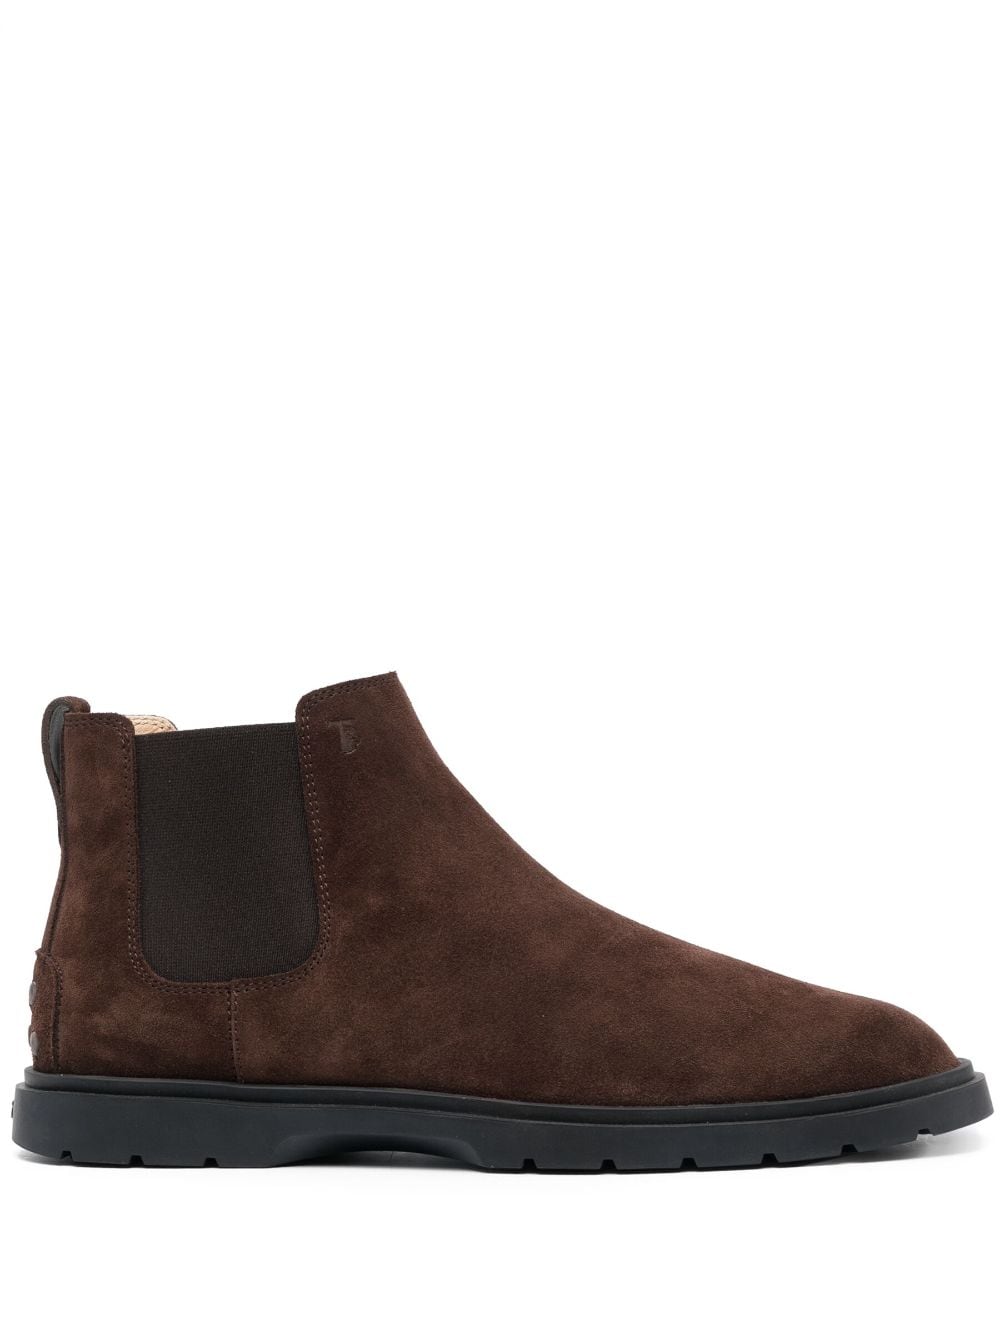 Tod's Tronchetto suede boots - Brown von Tod's